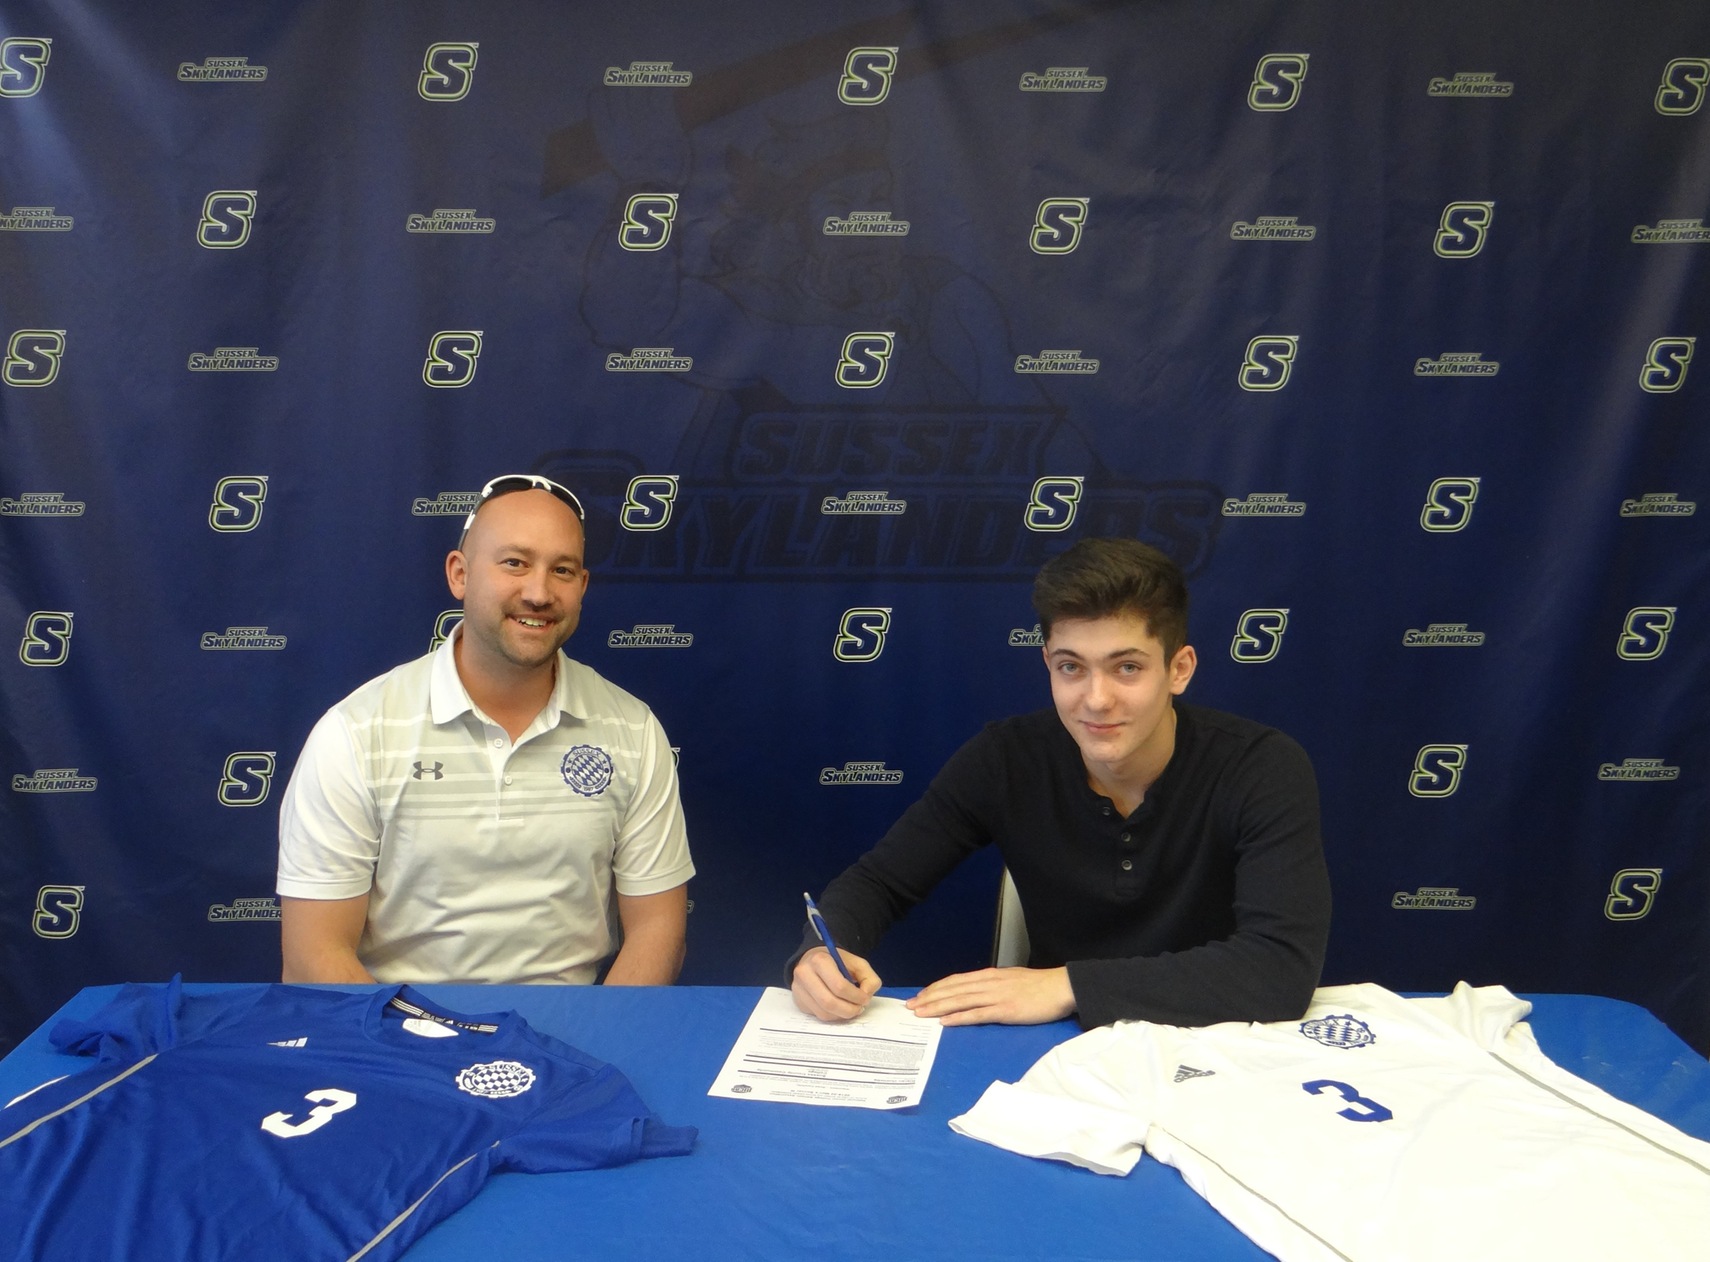 Oullette signs with Sussex